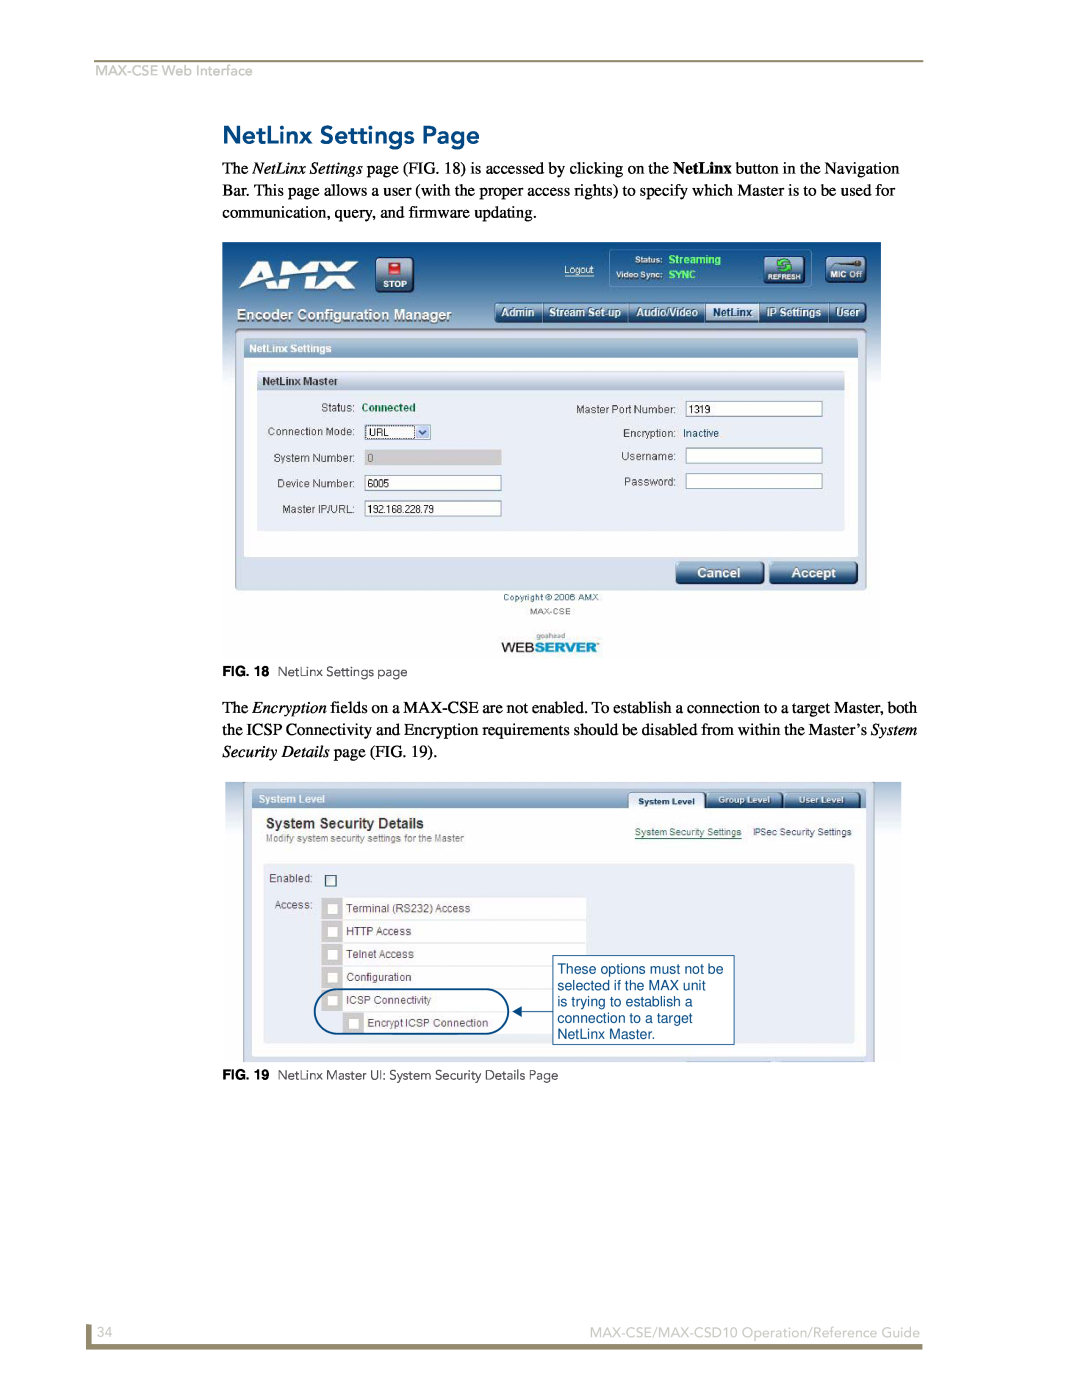 AMX manual NetLinx Settings Page, MAX-CSEWeb Interface, MAX-CSE/MAX-CSD10Operation/Reference Guide 